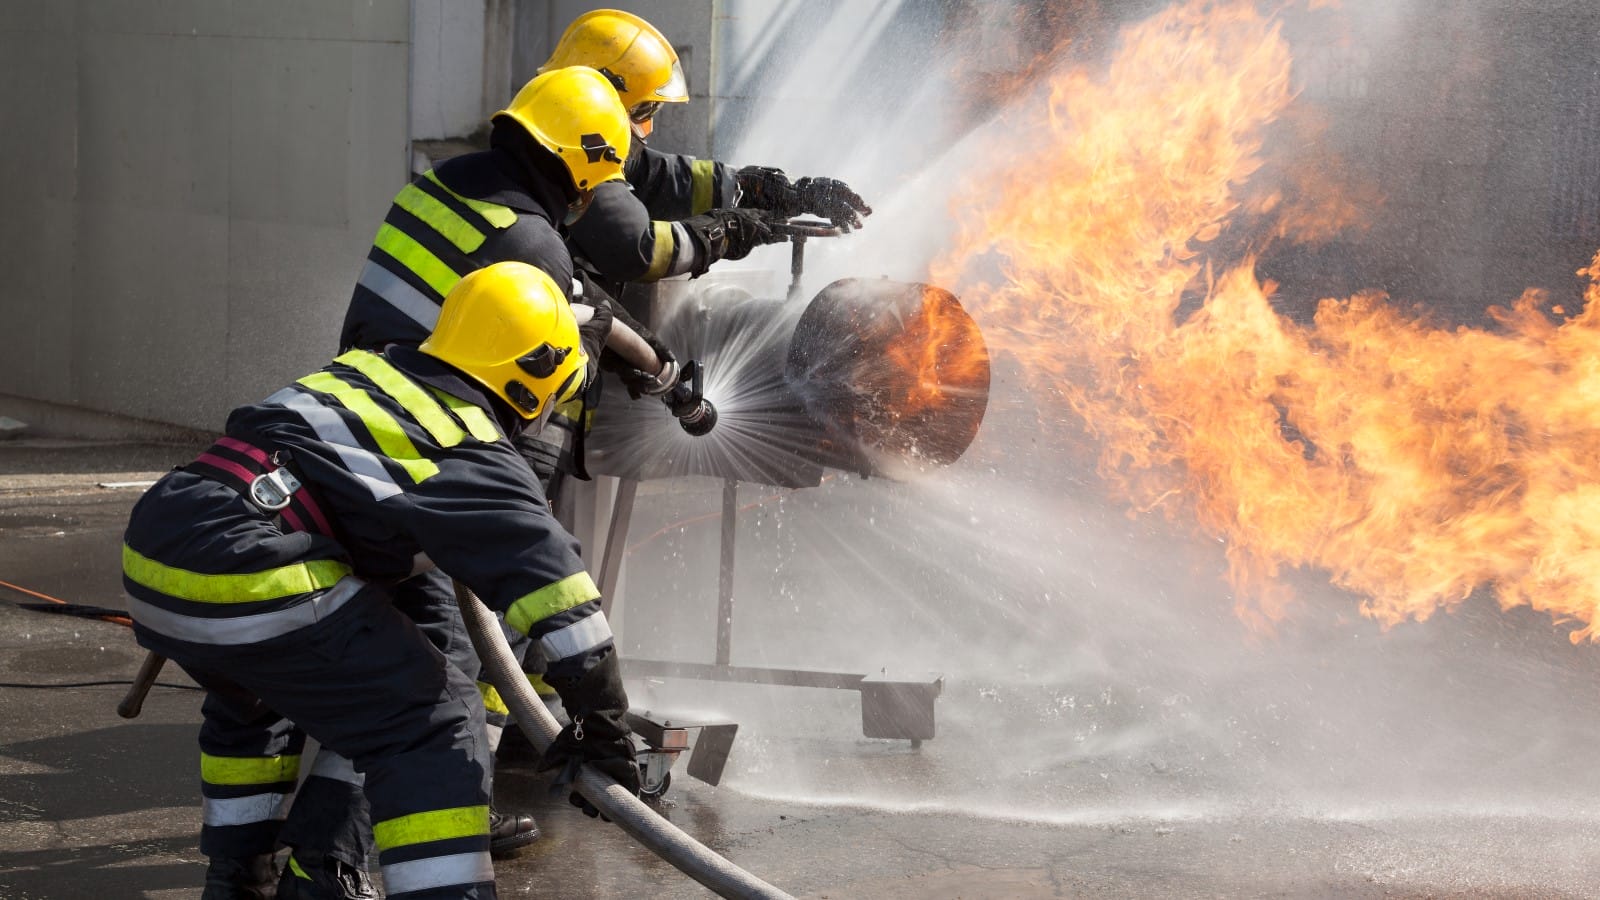 Firefighters in protective gear actively working to extinguish a gas fire, illustrating the dangers associated with gas leaks and the importance of proper detection and safety measures in homes